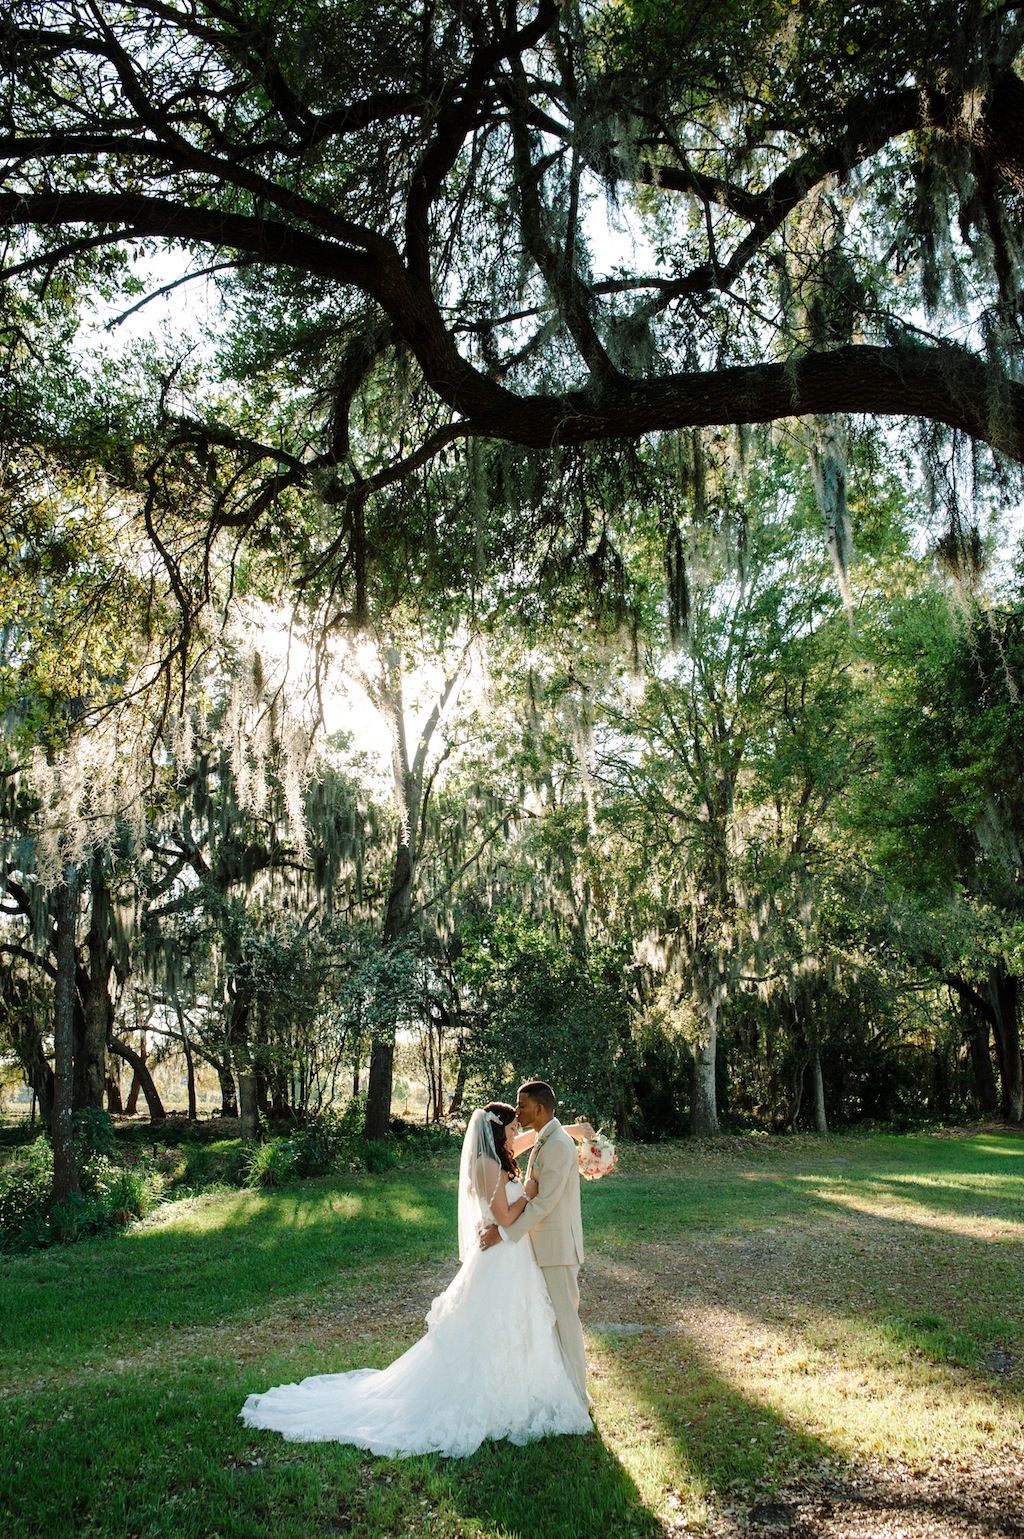 Mint, Coral and Yellow Rustic, Chic Cross Creek Ranch Wedding - Tampa Wedding Photographer 12-1 Photography (34)